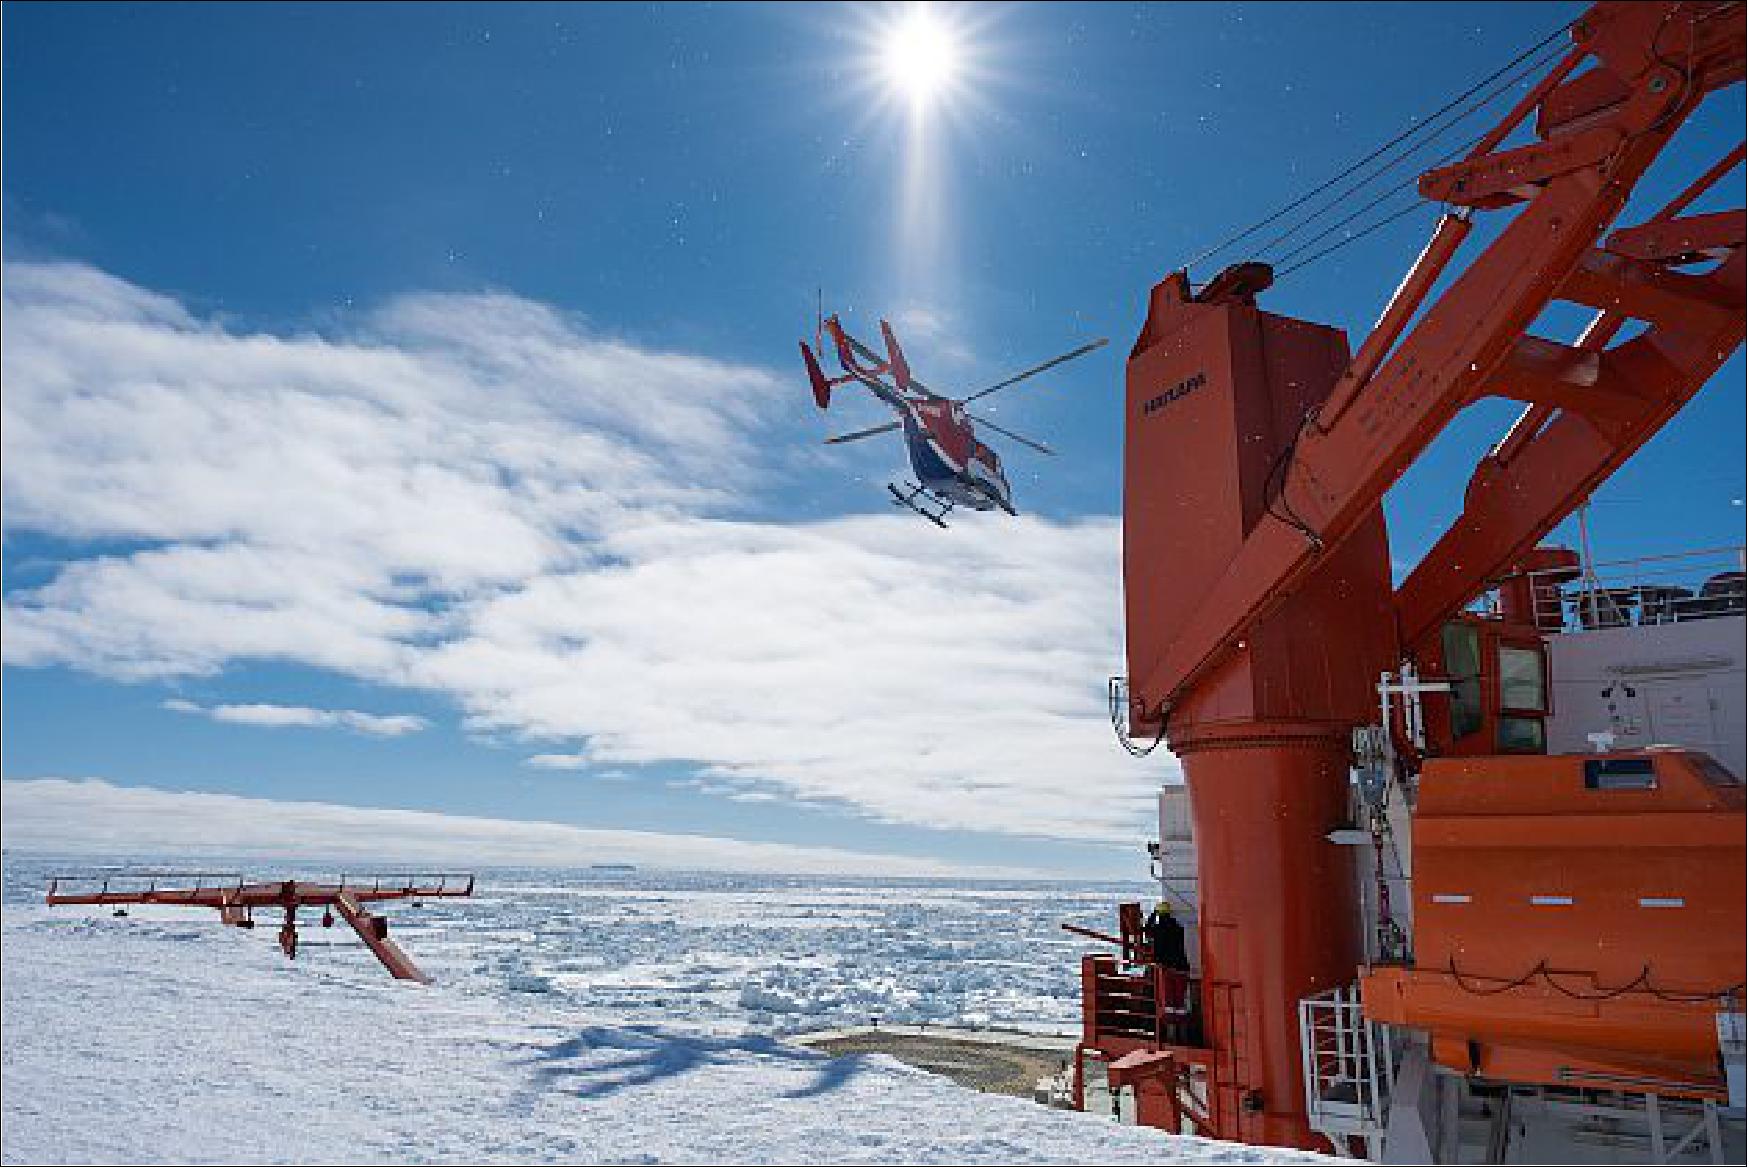 Figure 15: A helicopter taking off from the stern of Polarstern, docked next to the shelf ice (image credit: DLR/NASA/Jess Bunchek)